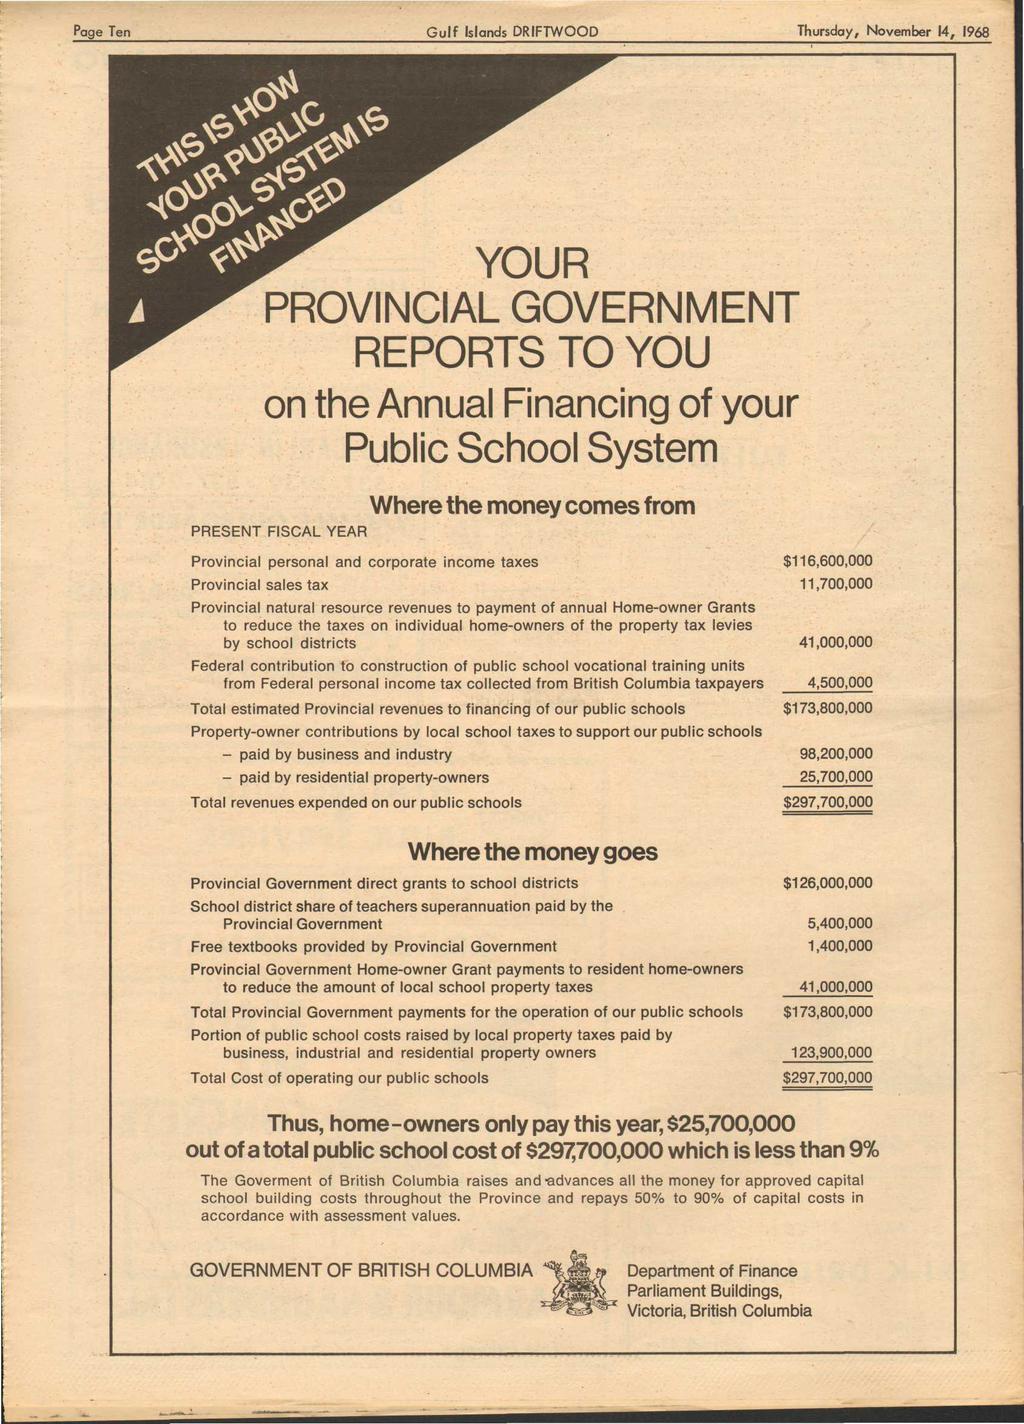 Page Ten Gulf Islands DRIFTWOOD Thursday, November 14, 1968 YOUR PROVINCIAL GOVERNMENT REPORTS TO YOU on the Annual Financing of your Public School System Where the money comes from PRESENT FISCAL